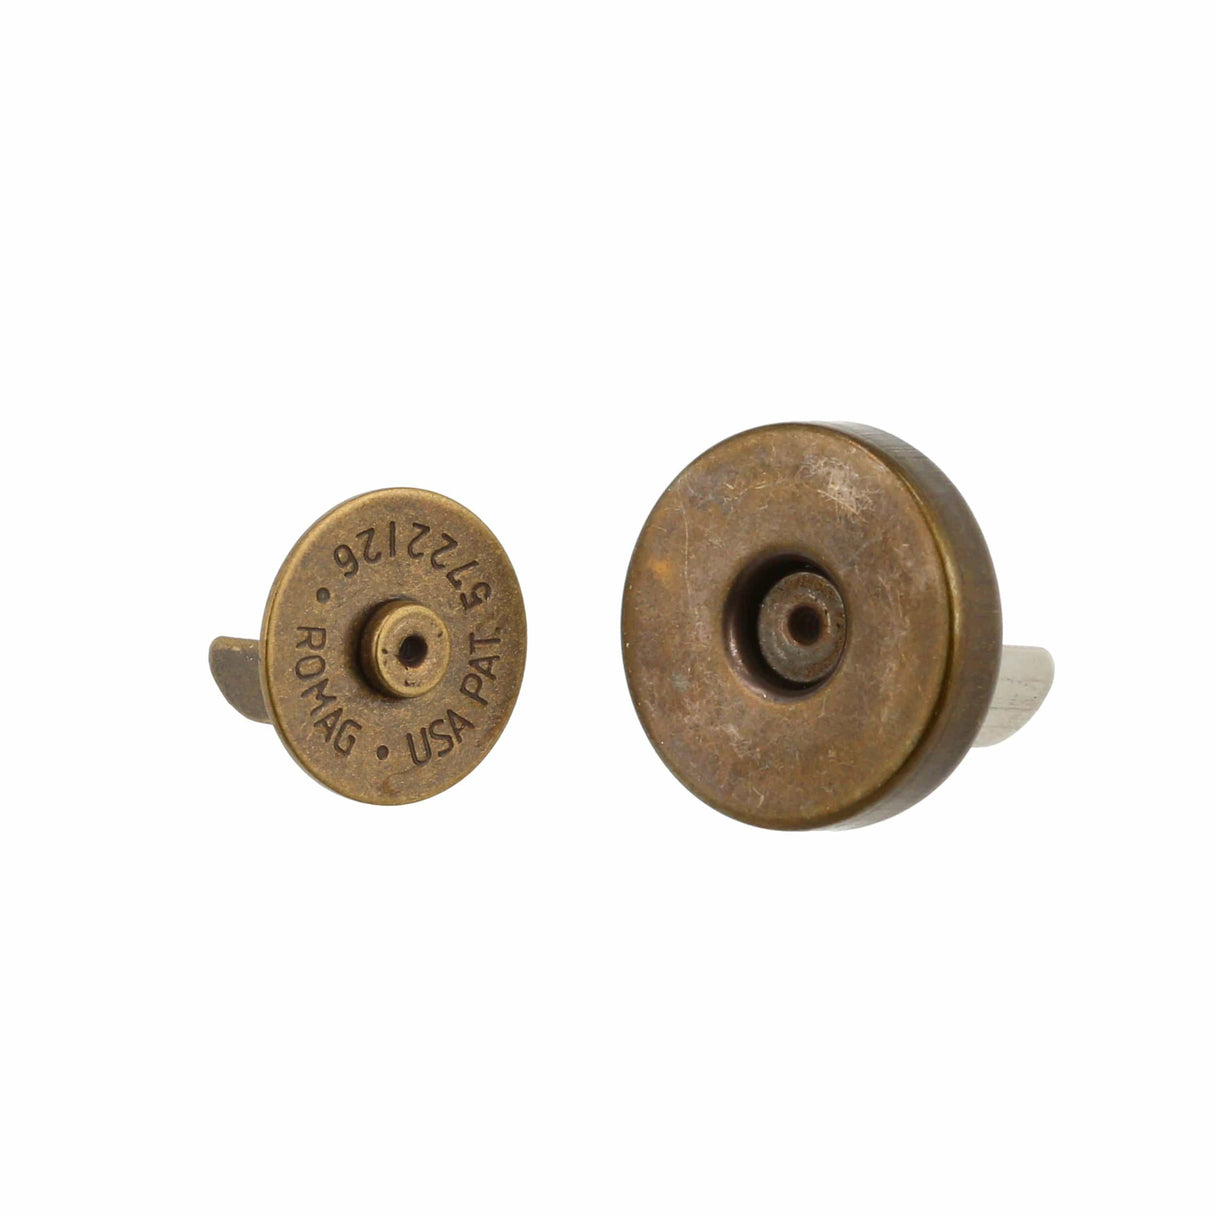 Brass Snap Button Fasteners for Purse Button for Leather 5 